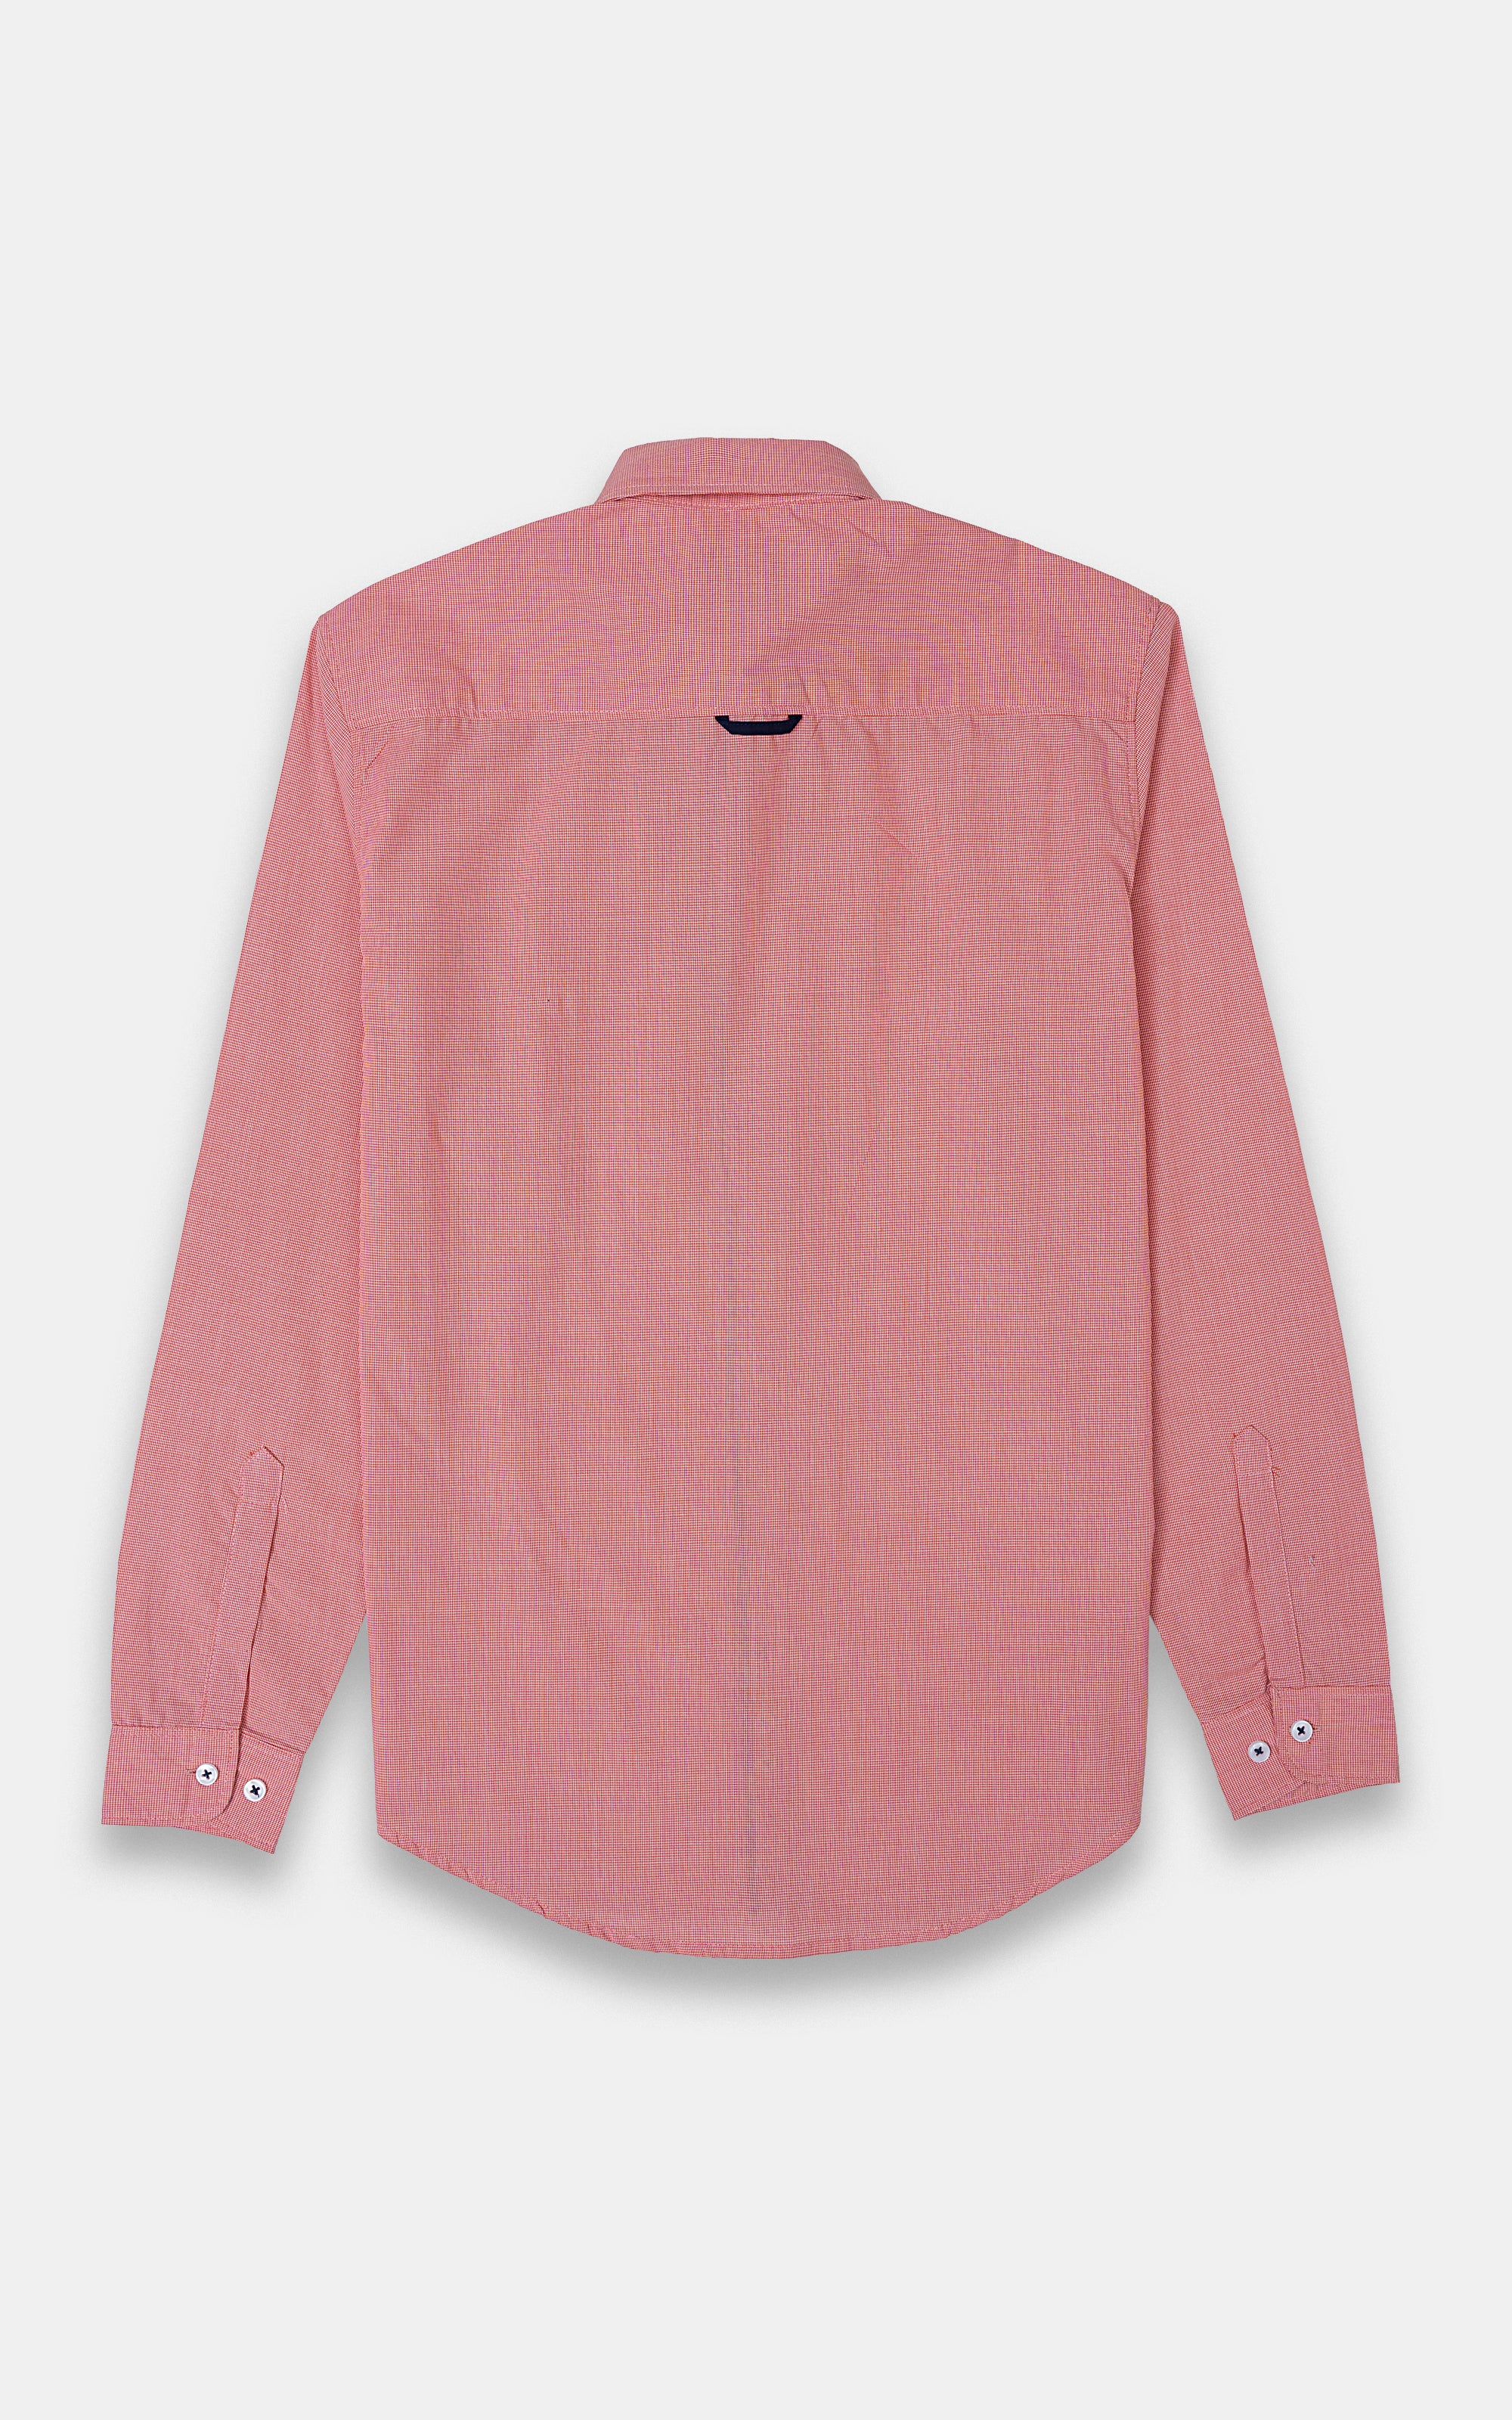 CASUAL SHIRT CORAL TEXTURED